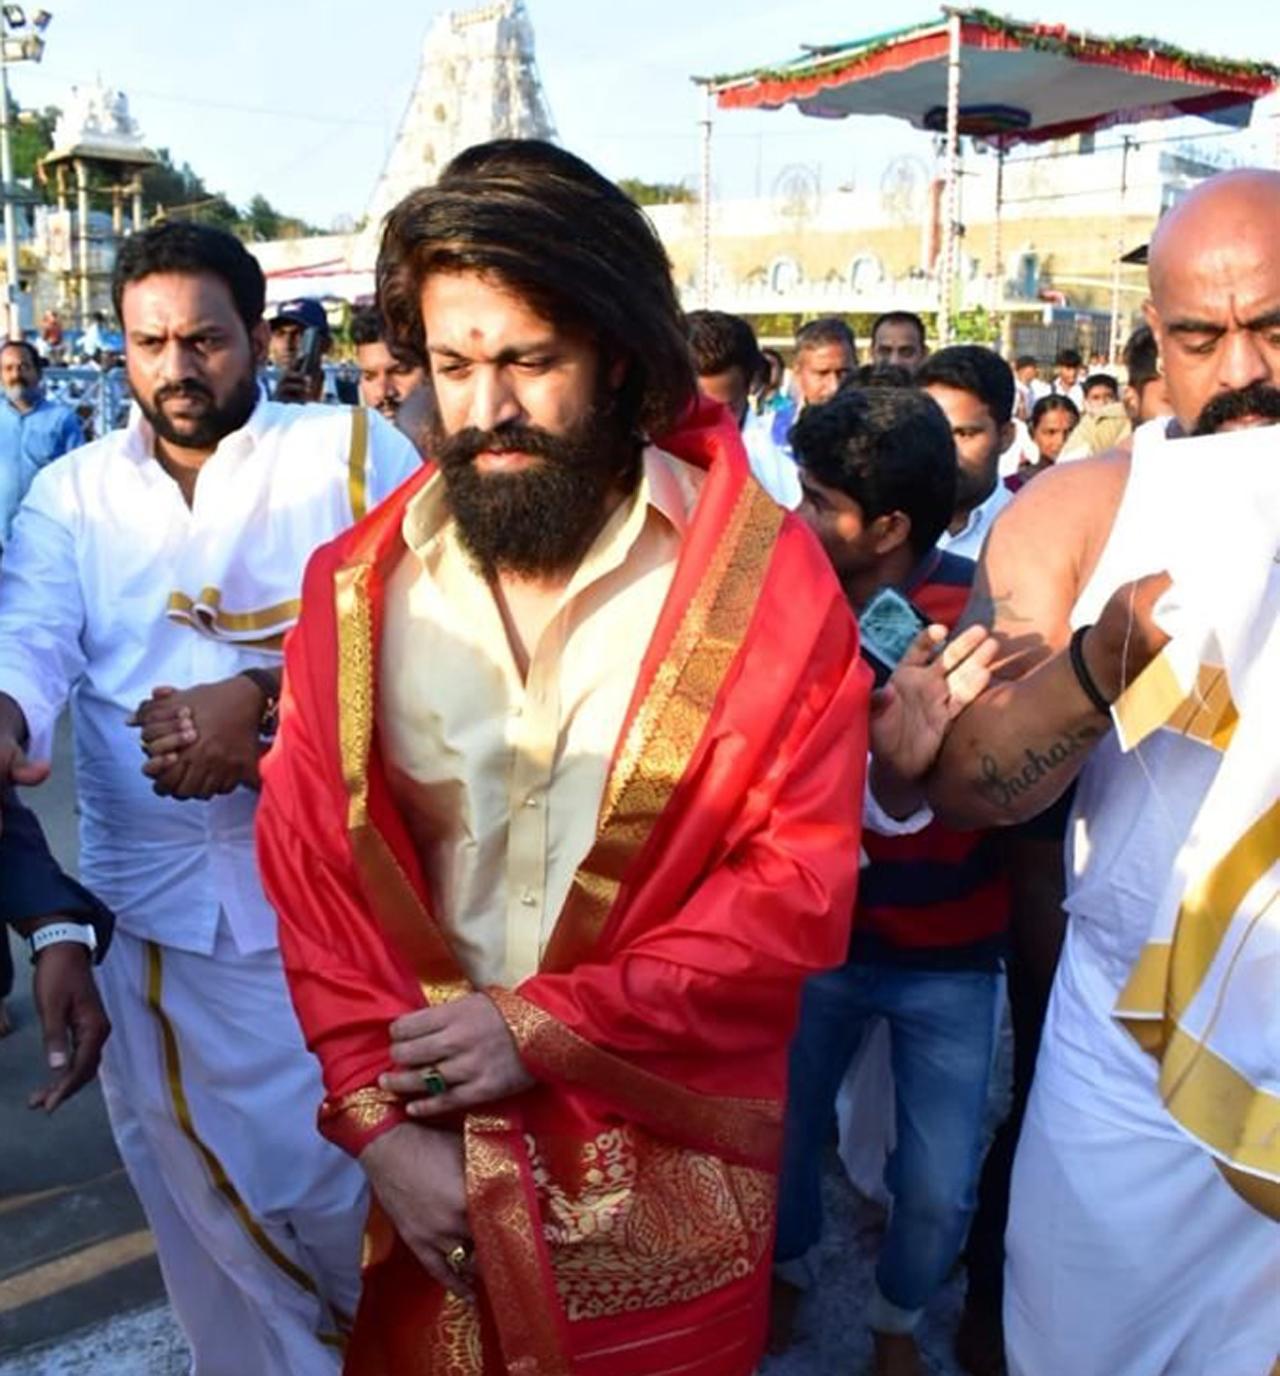 'KGF: Chapter 2' is gearing up for its worldwide release on April 14. Helmed by Prashanth Neel, the 'KGF' franchise is one of the most-hyped productions of the Kannada film industry.